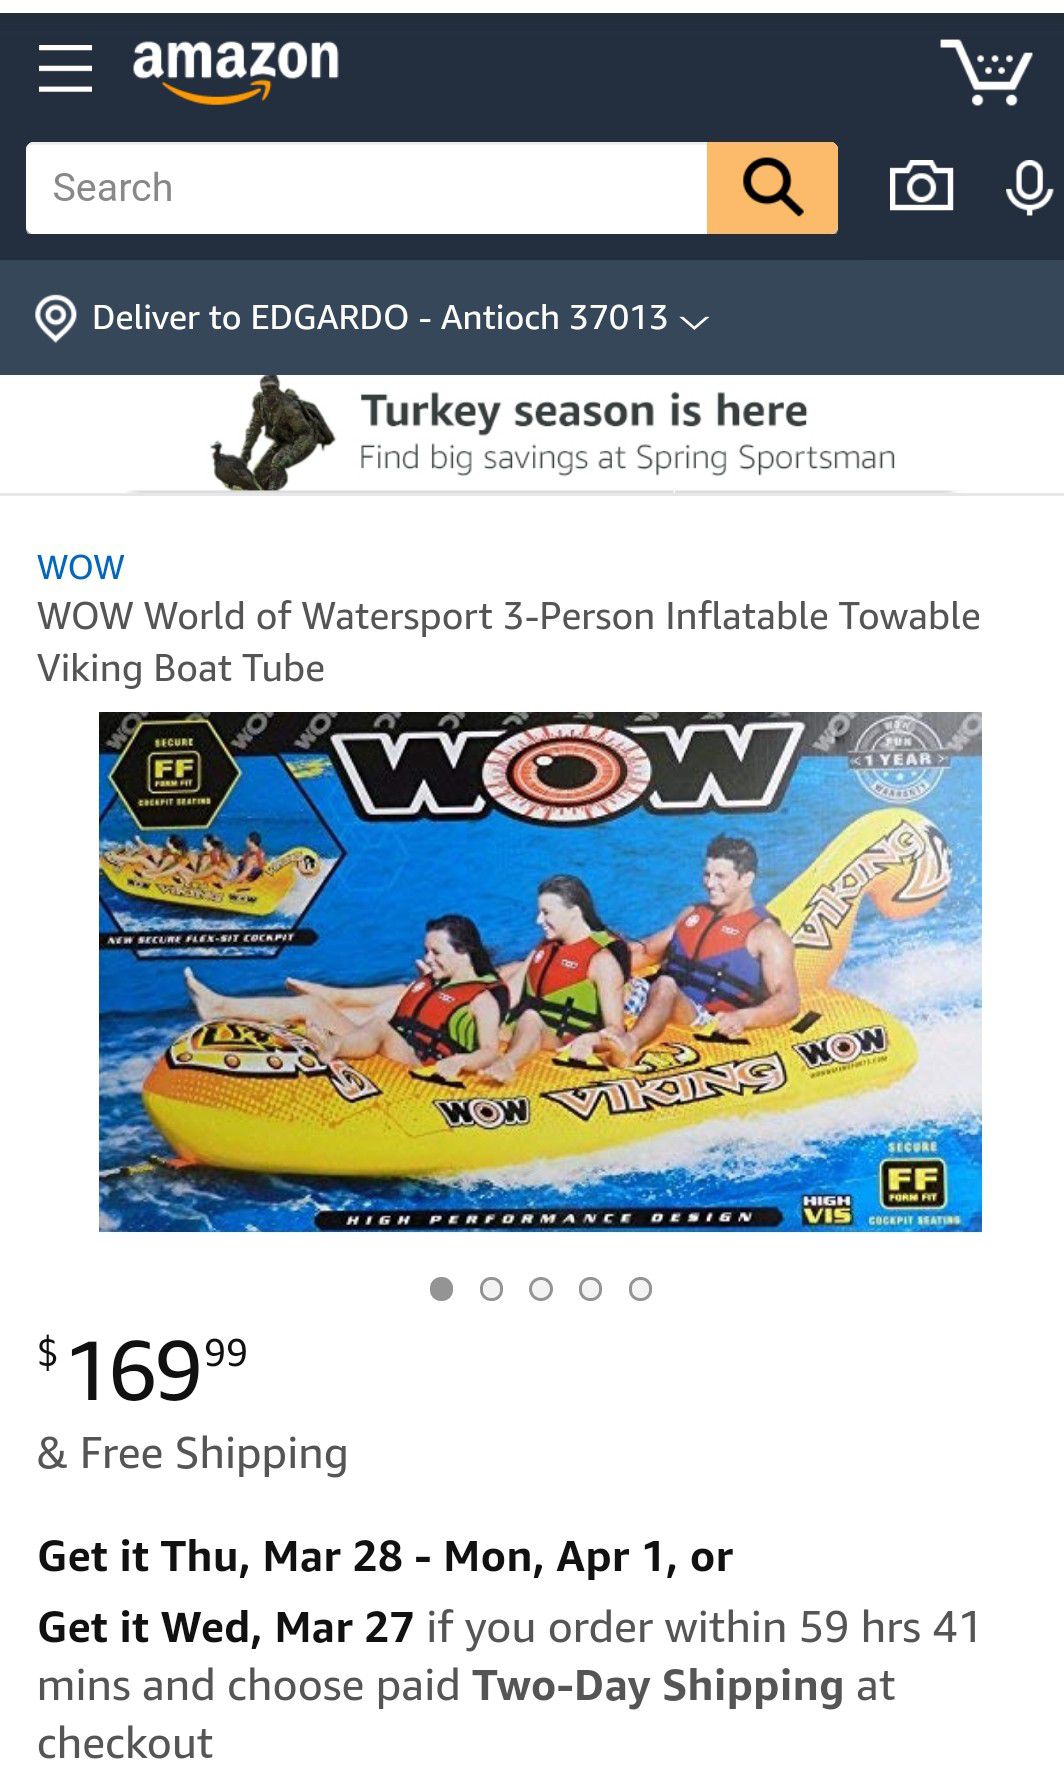 3-Person Inflatable Towable Viking Boat Tube